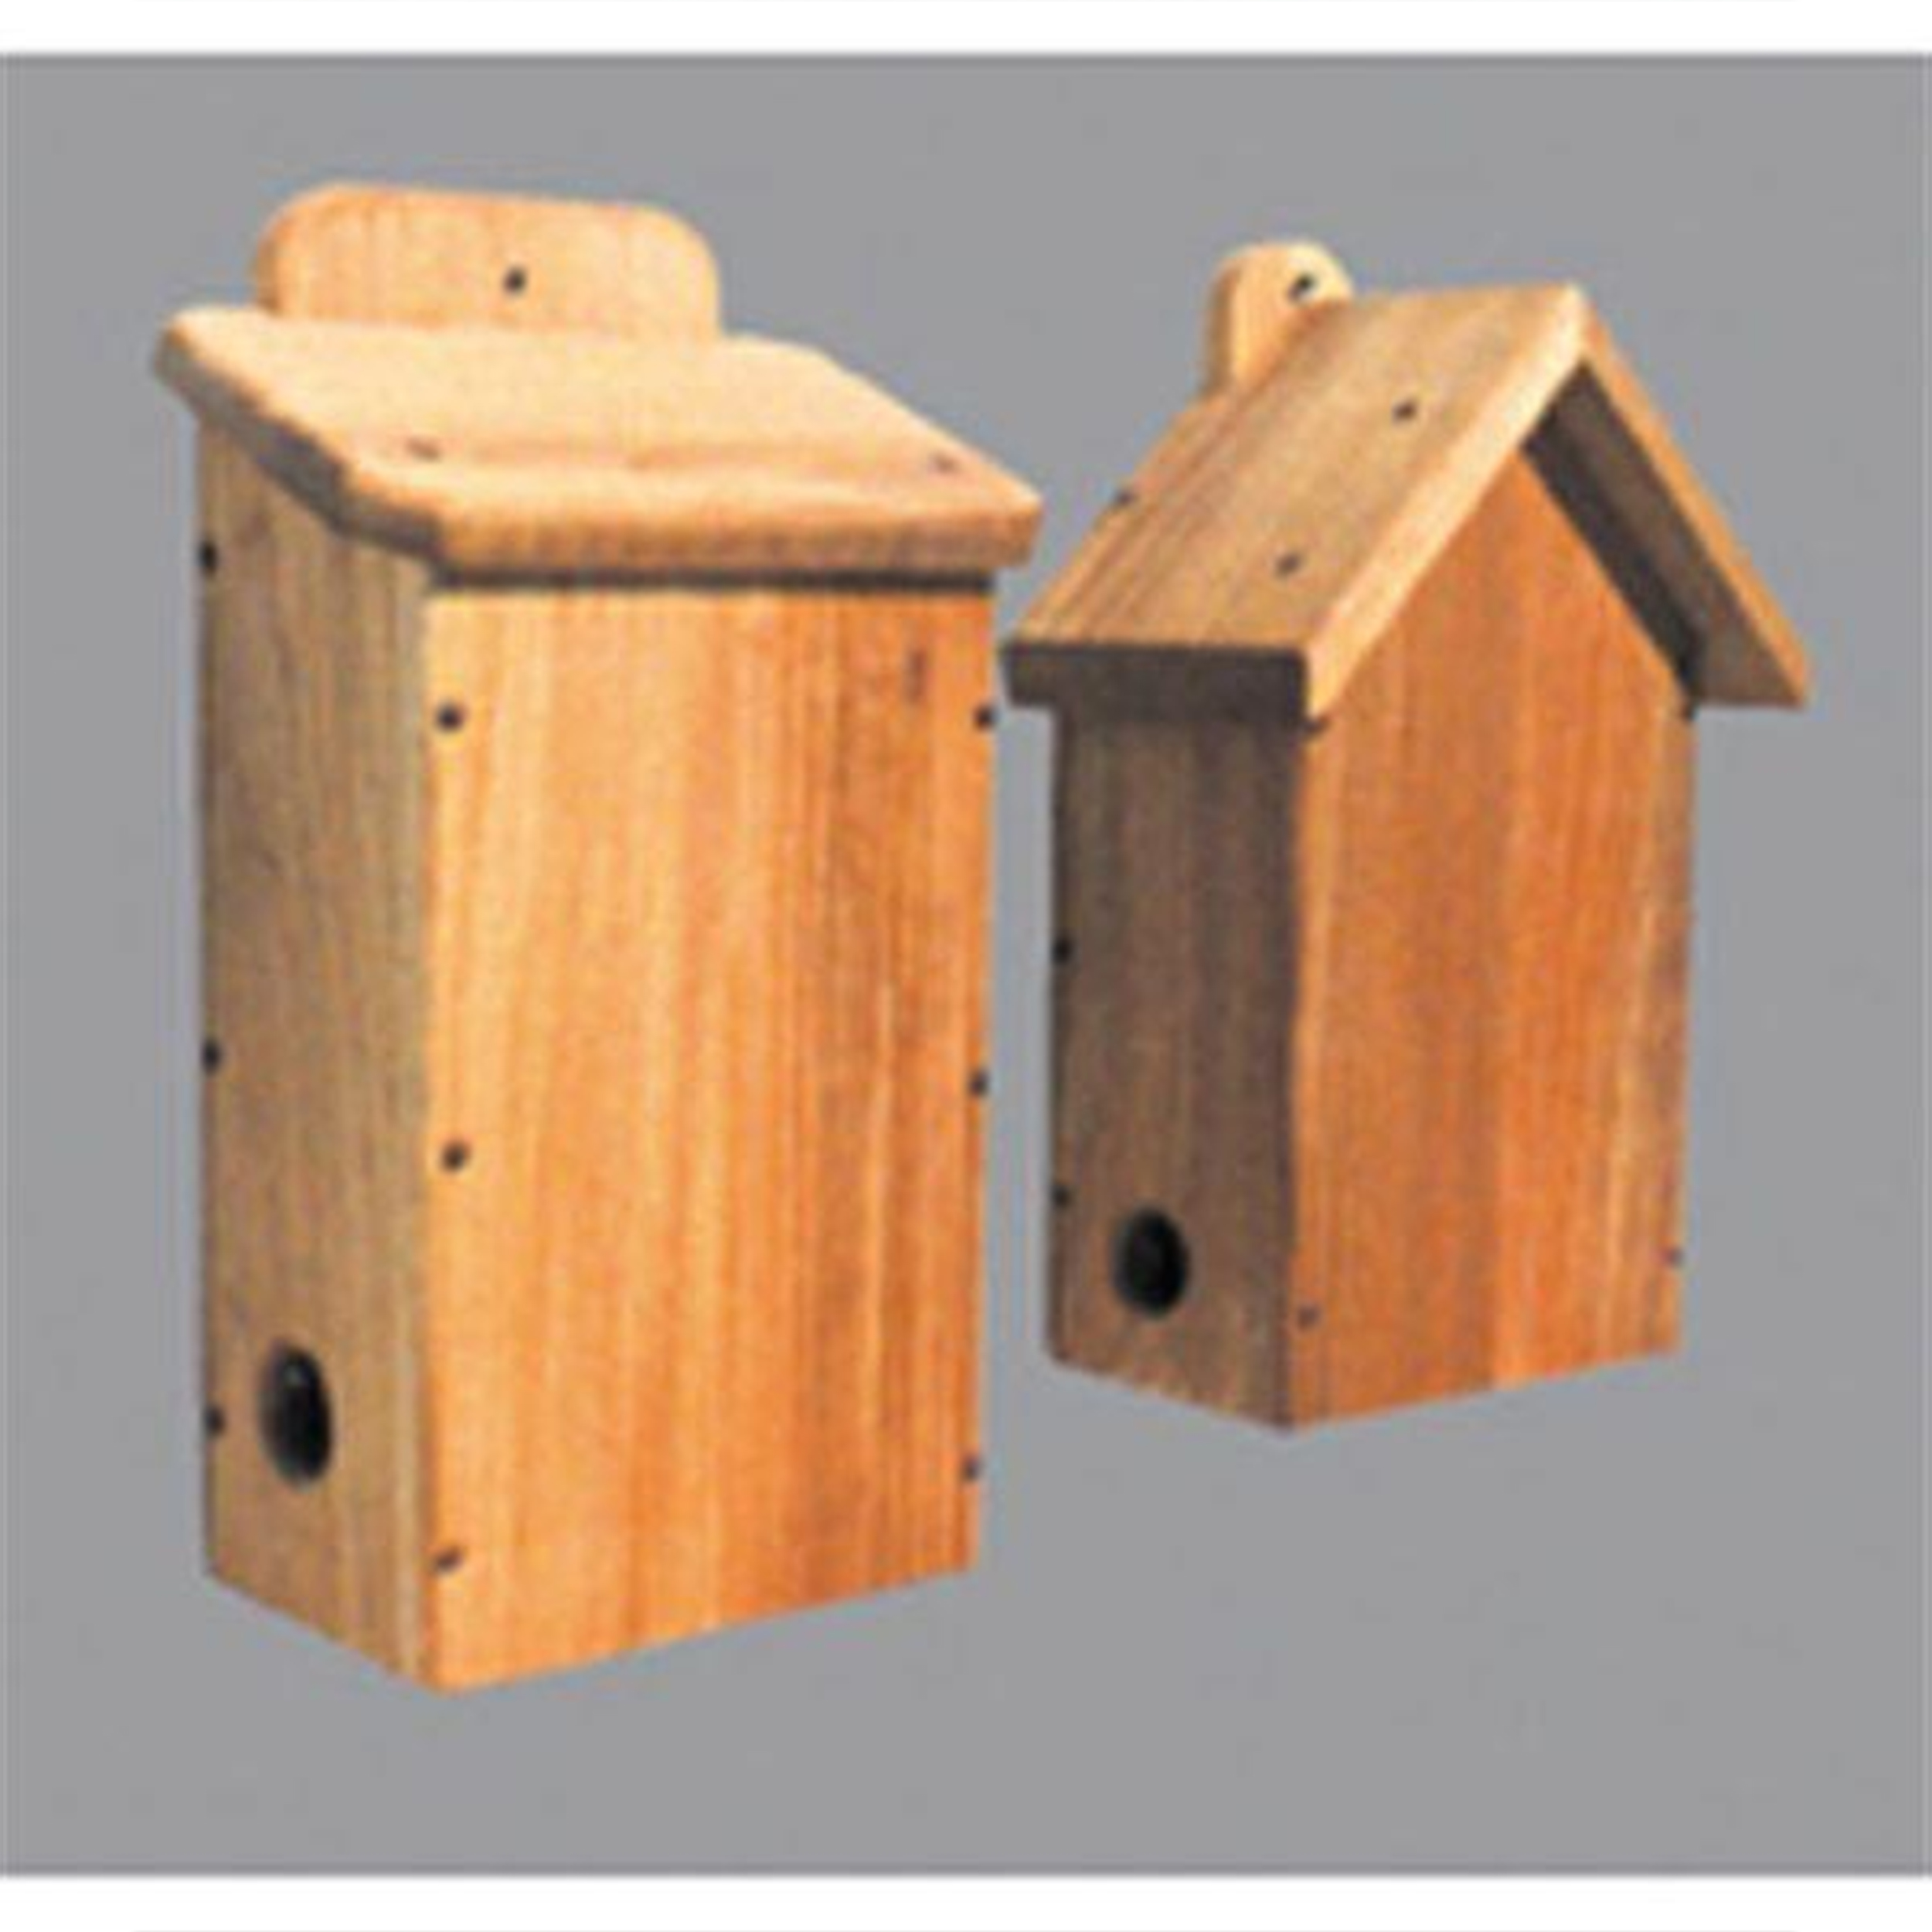 Woodworking Project Paper Plan To Build Two Bird Shelters